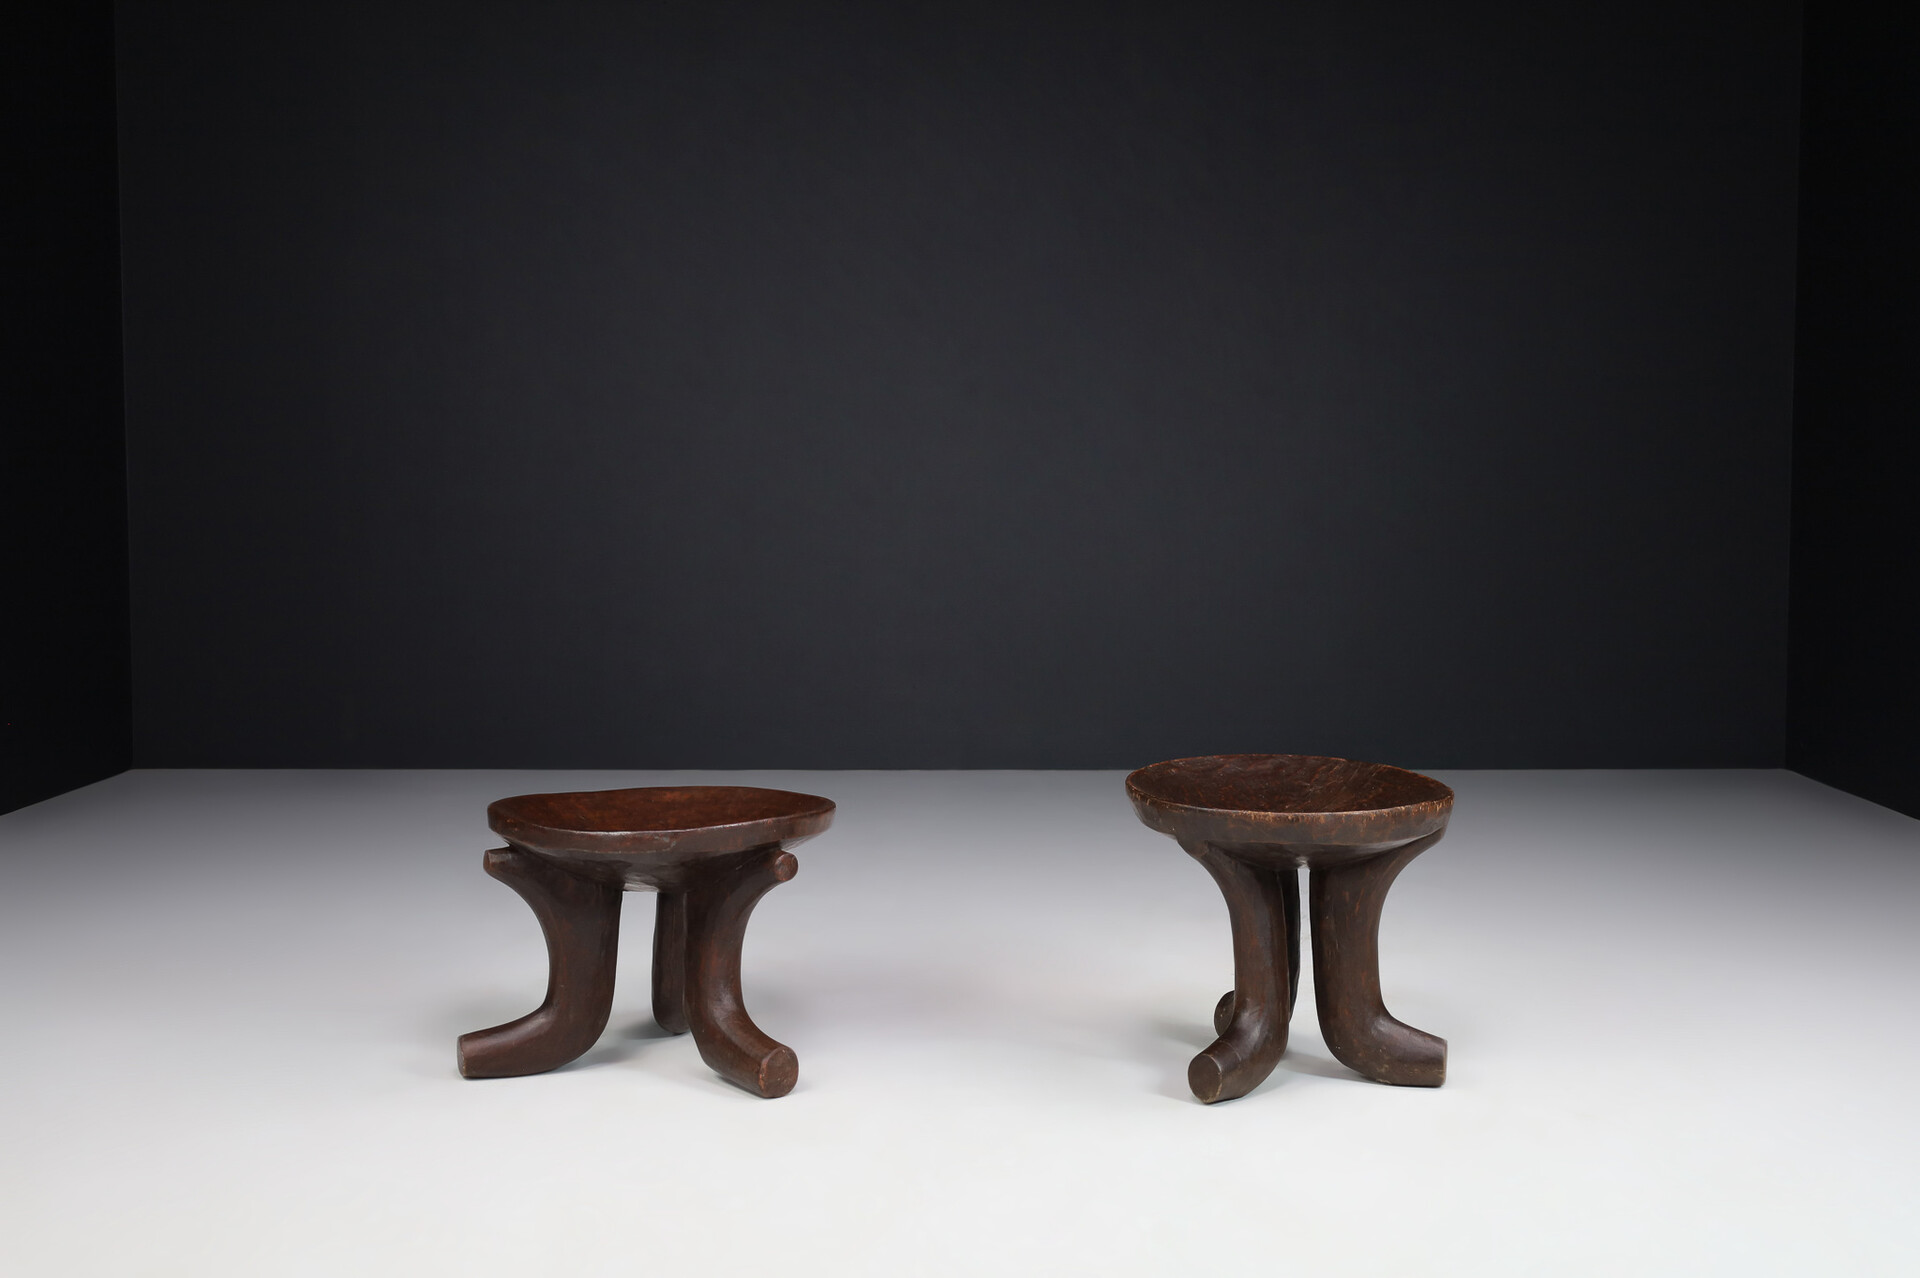 Art and craft OLD POKOT STOOLS WITH PATINA, Africa Kenya 1950s Mid-20th century